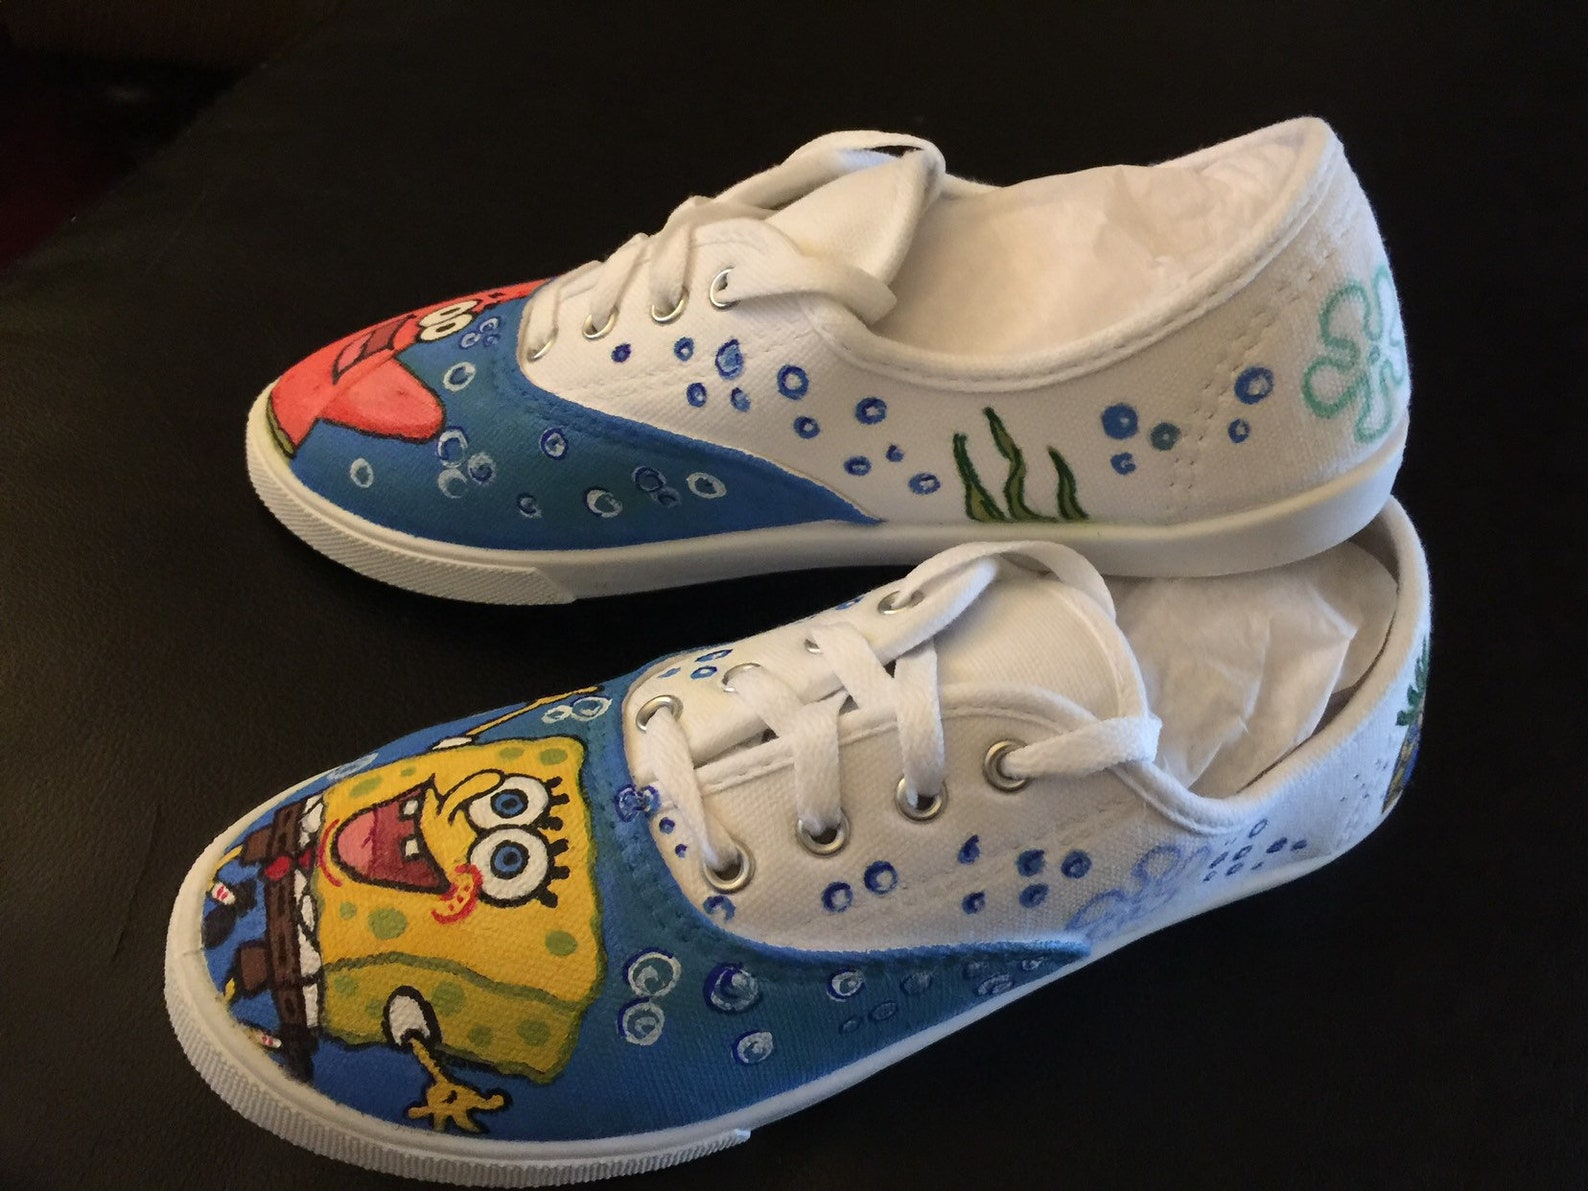 Hand painted inspired by Sponge Bob Sneakers | Etsy